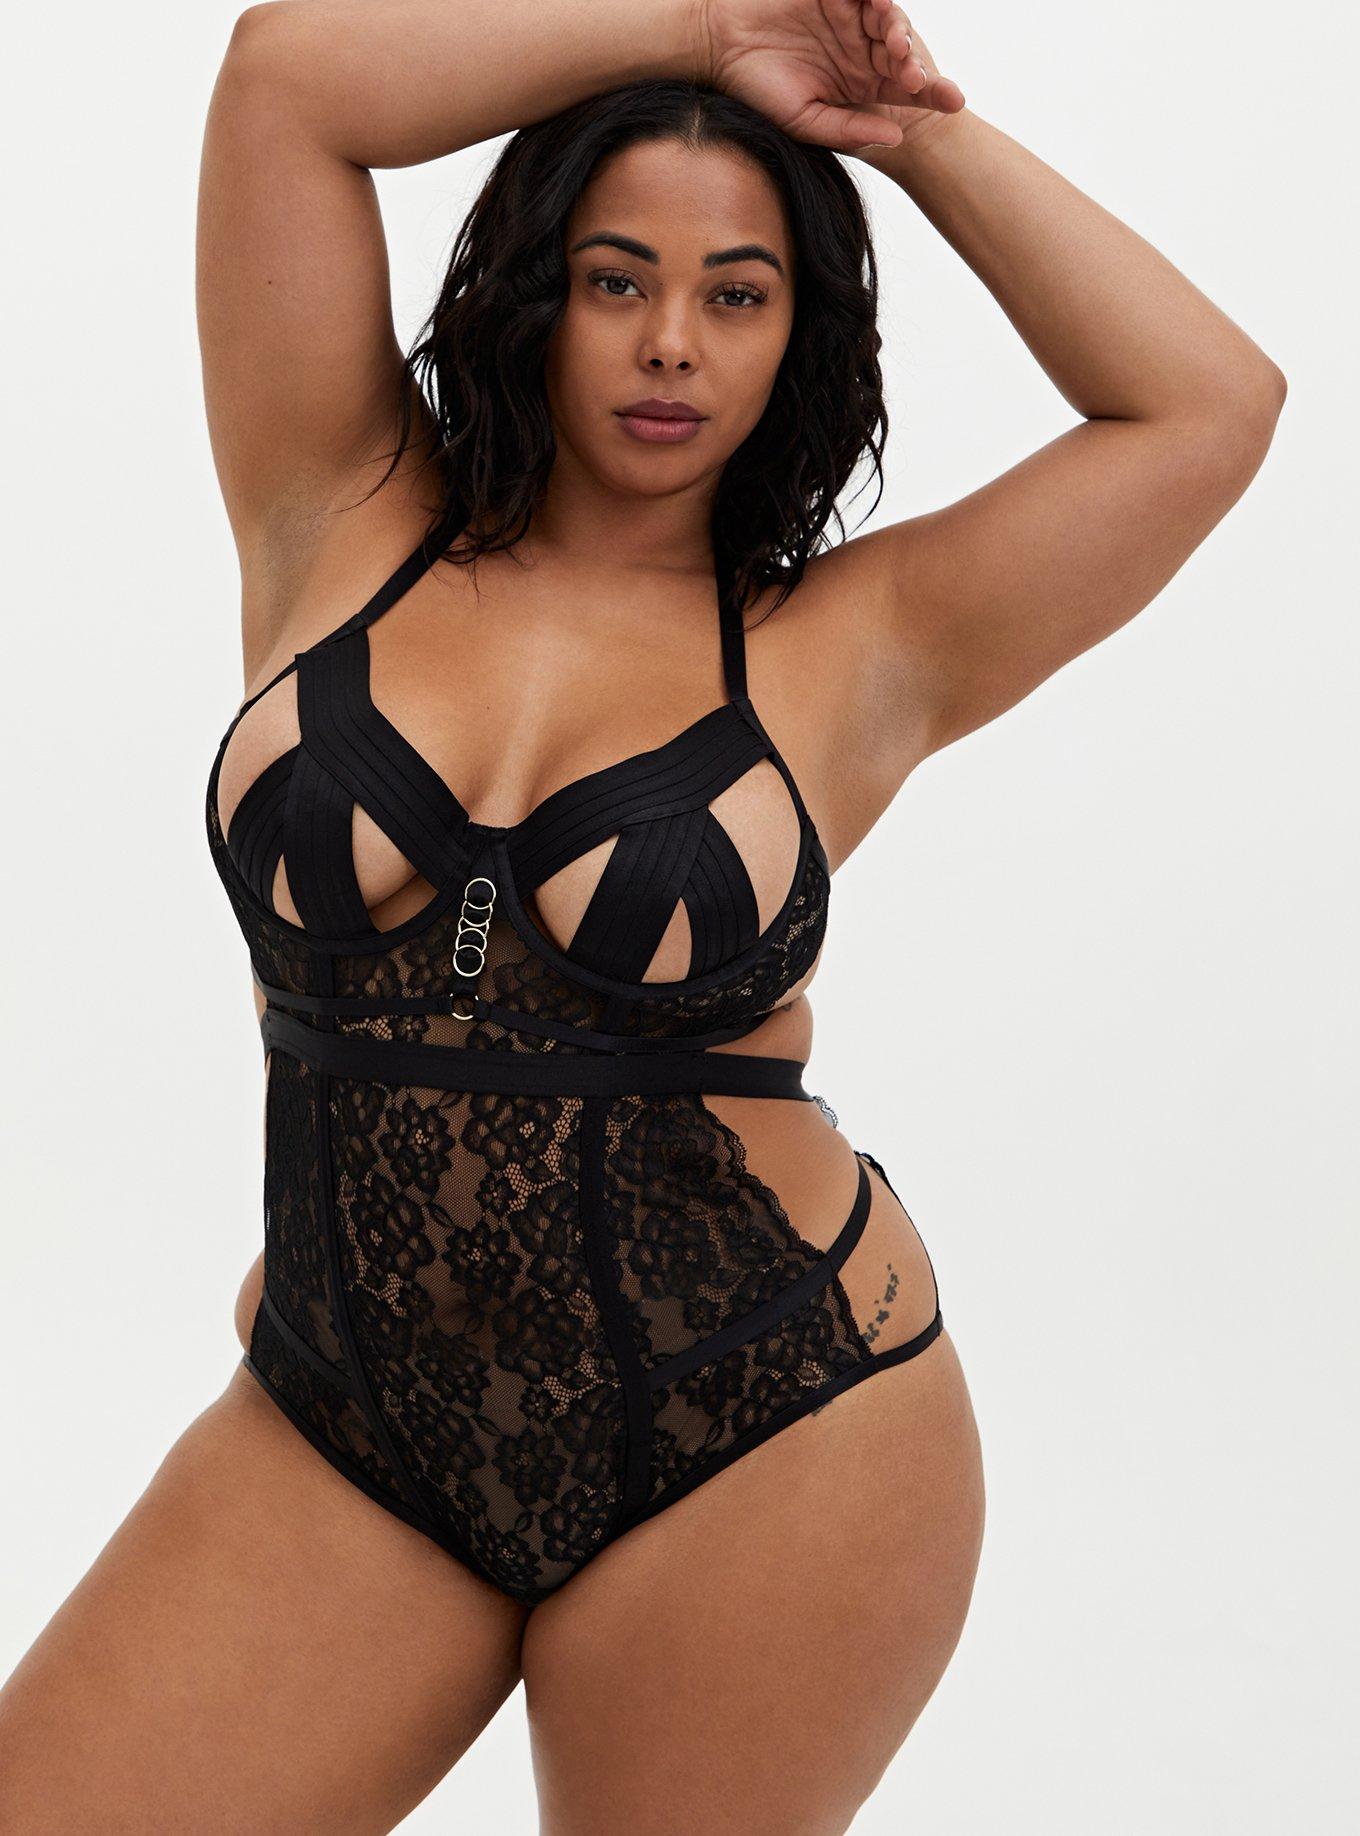 I've got 32G boobs & found the best bodysuit for girls with big breasts…it's  flattering & you don't need a bra with it